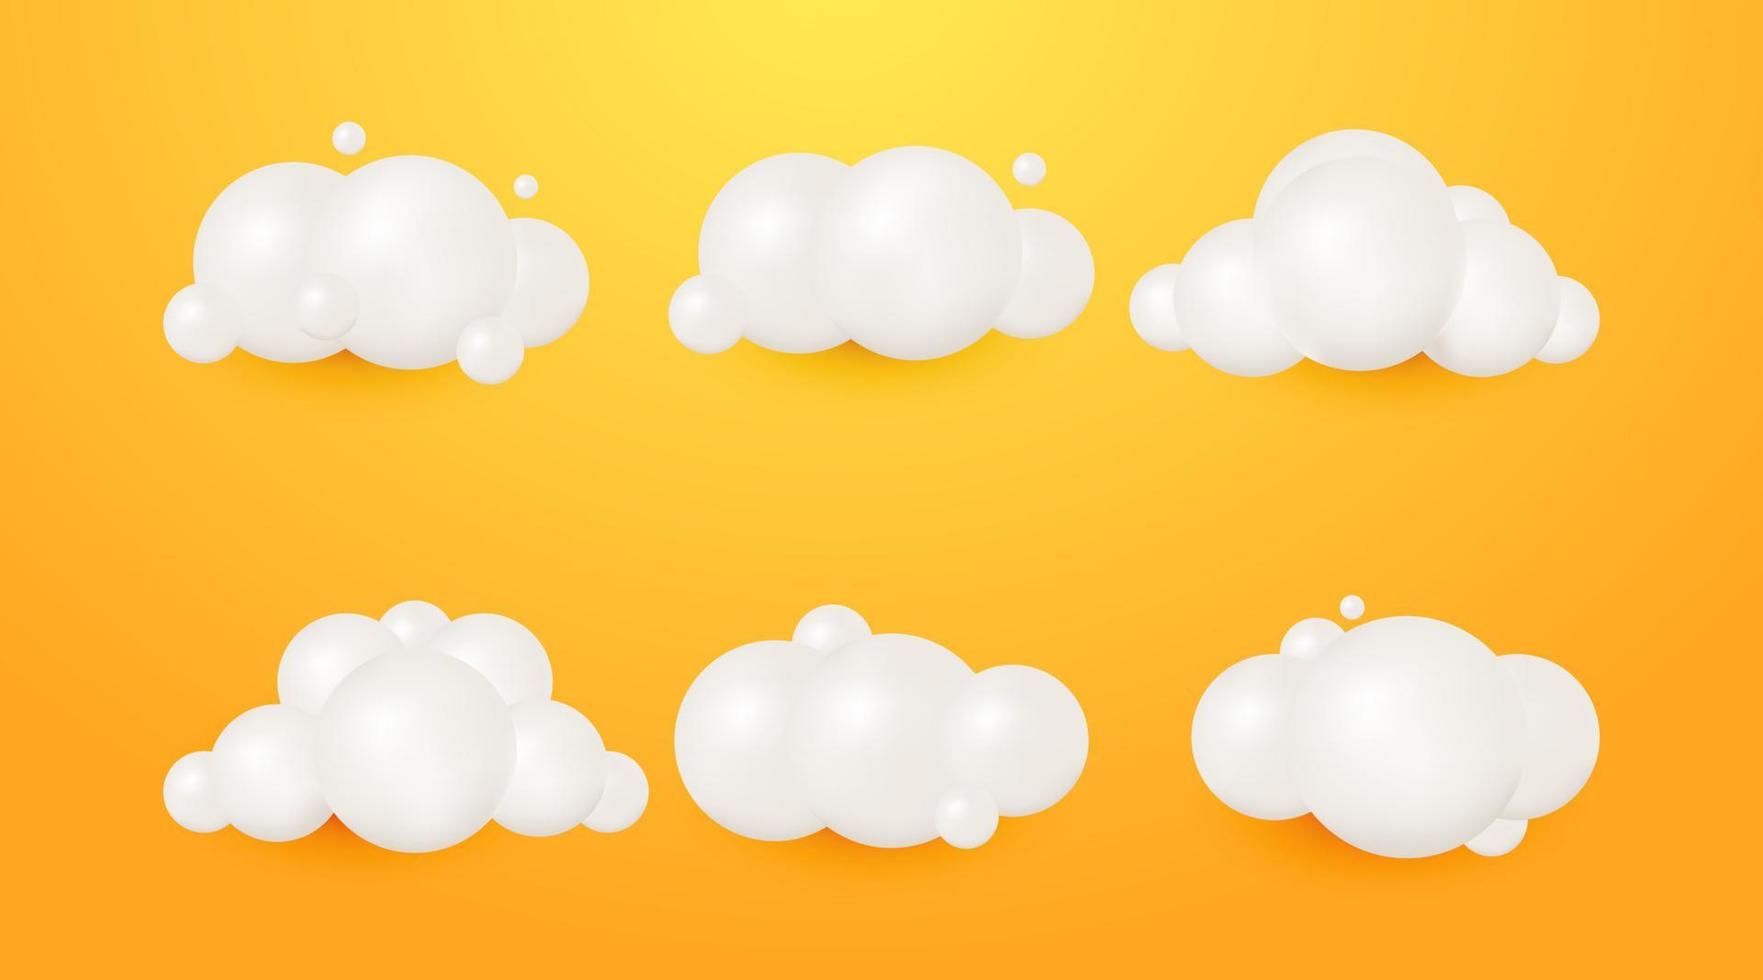 White 3d realistic clouds render soft round cartoon icon collection isolated on a yellow background vector